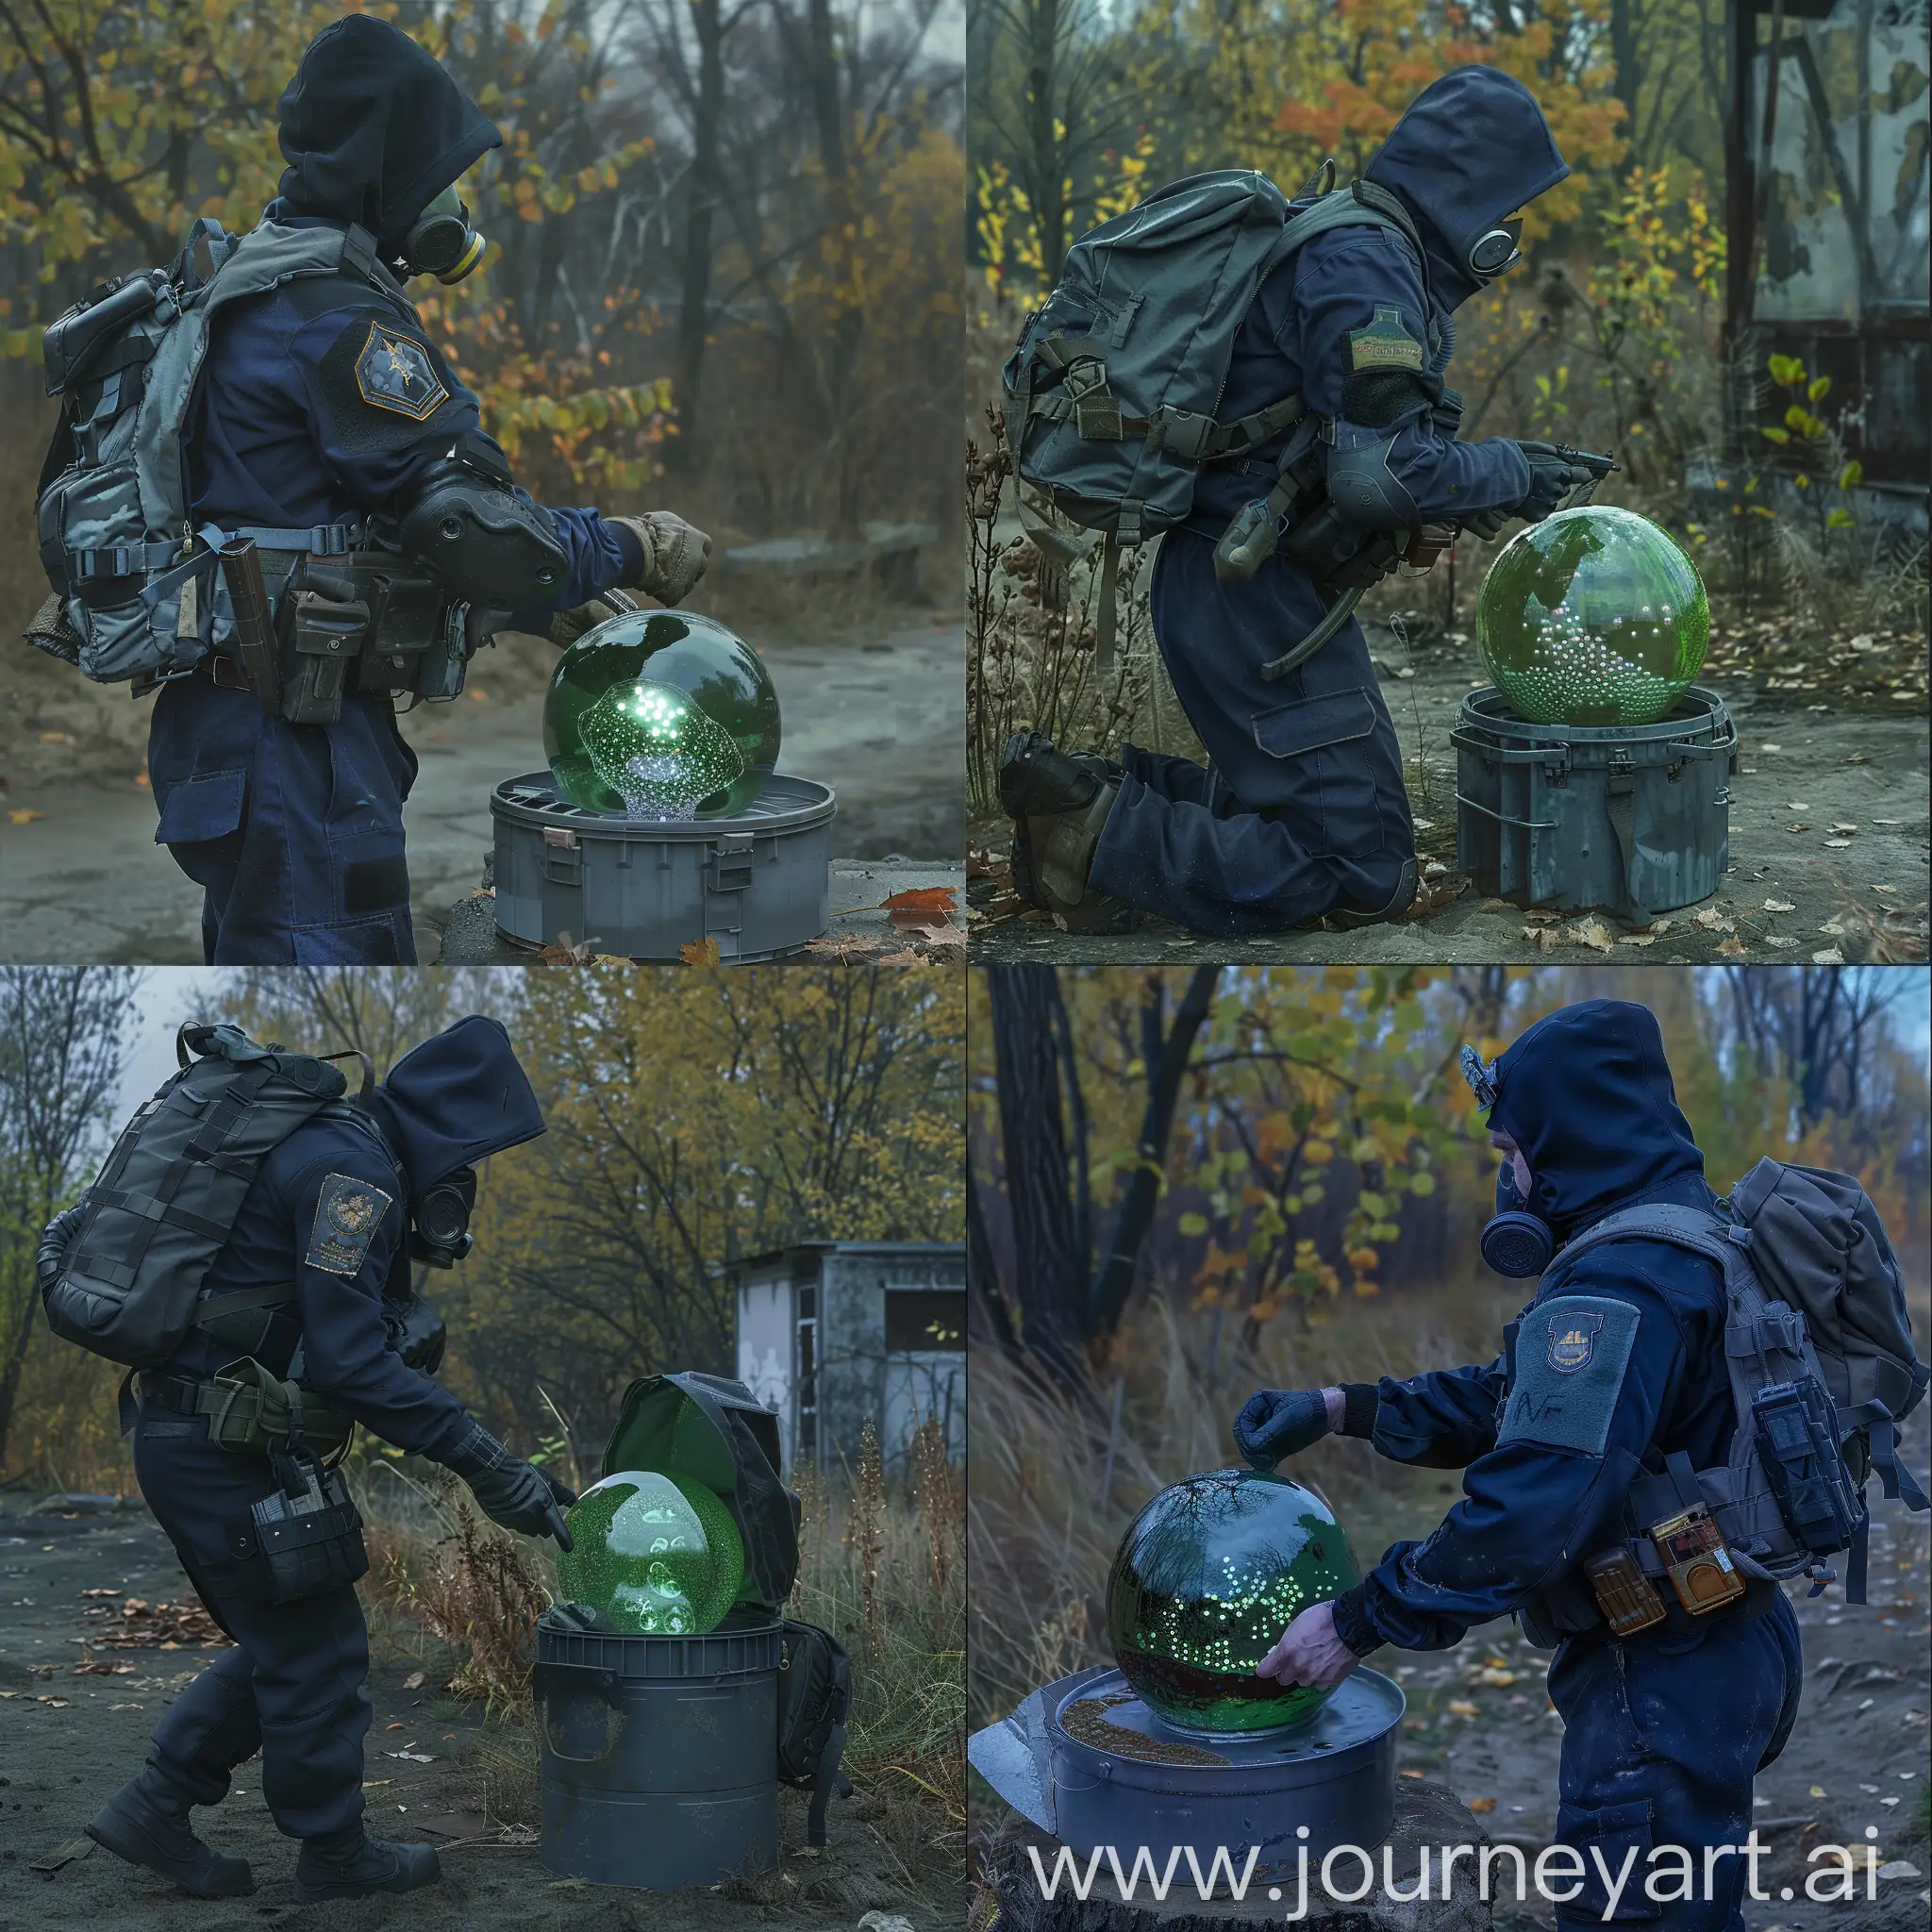 The mercenary from the stalker game, the mercenary is dressed in a dark blue jumpsuit, gray military unloading, a small military backpack, a respirator mask, a hood, the mercenary collects an artifact in special container, the artifact looks like a large green ball with bubbles inside, the ball glows, the weather is Gloomy autumn, Chernobyl.